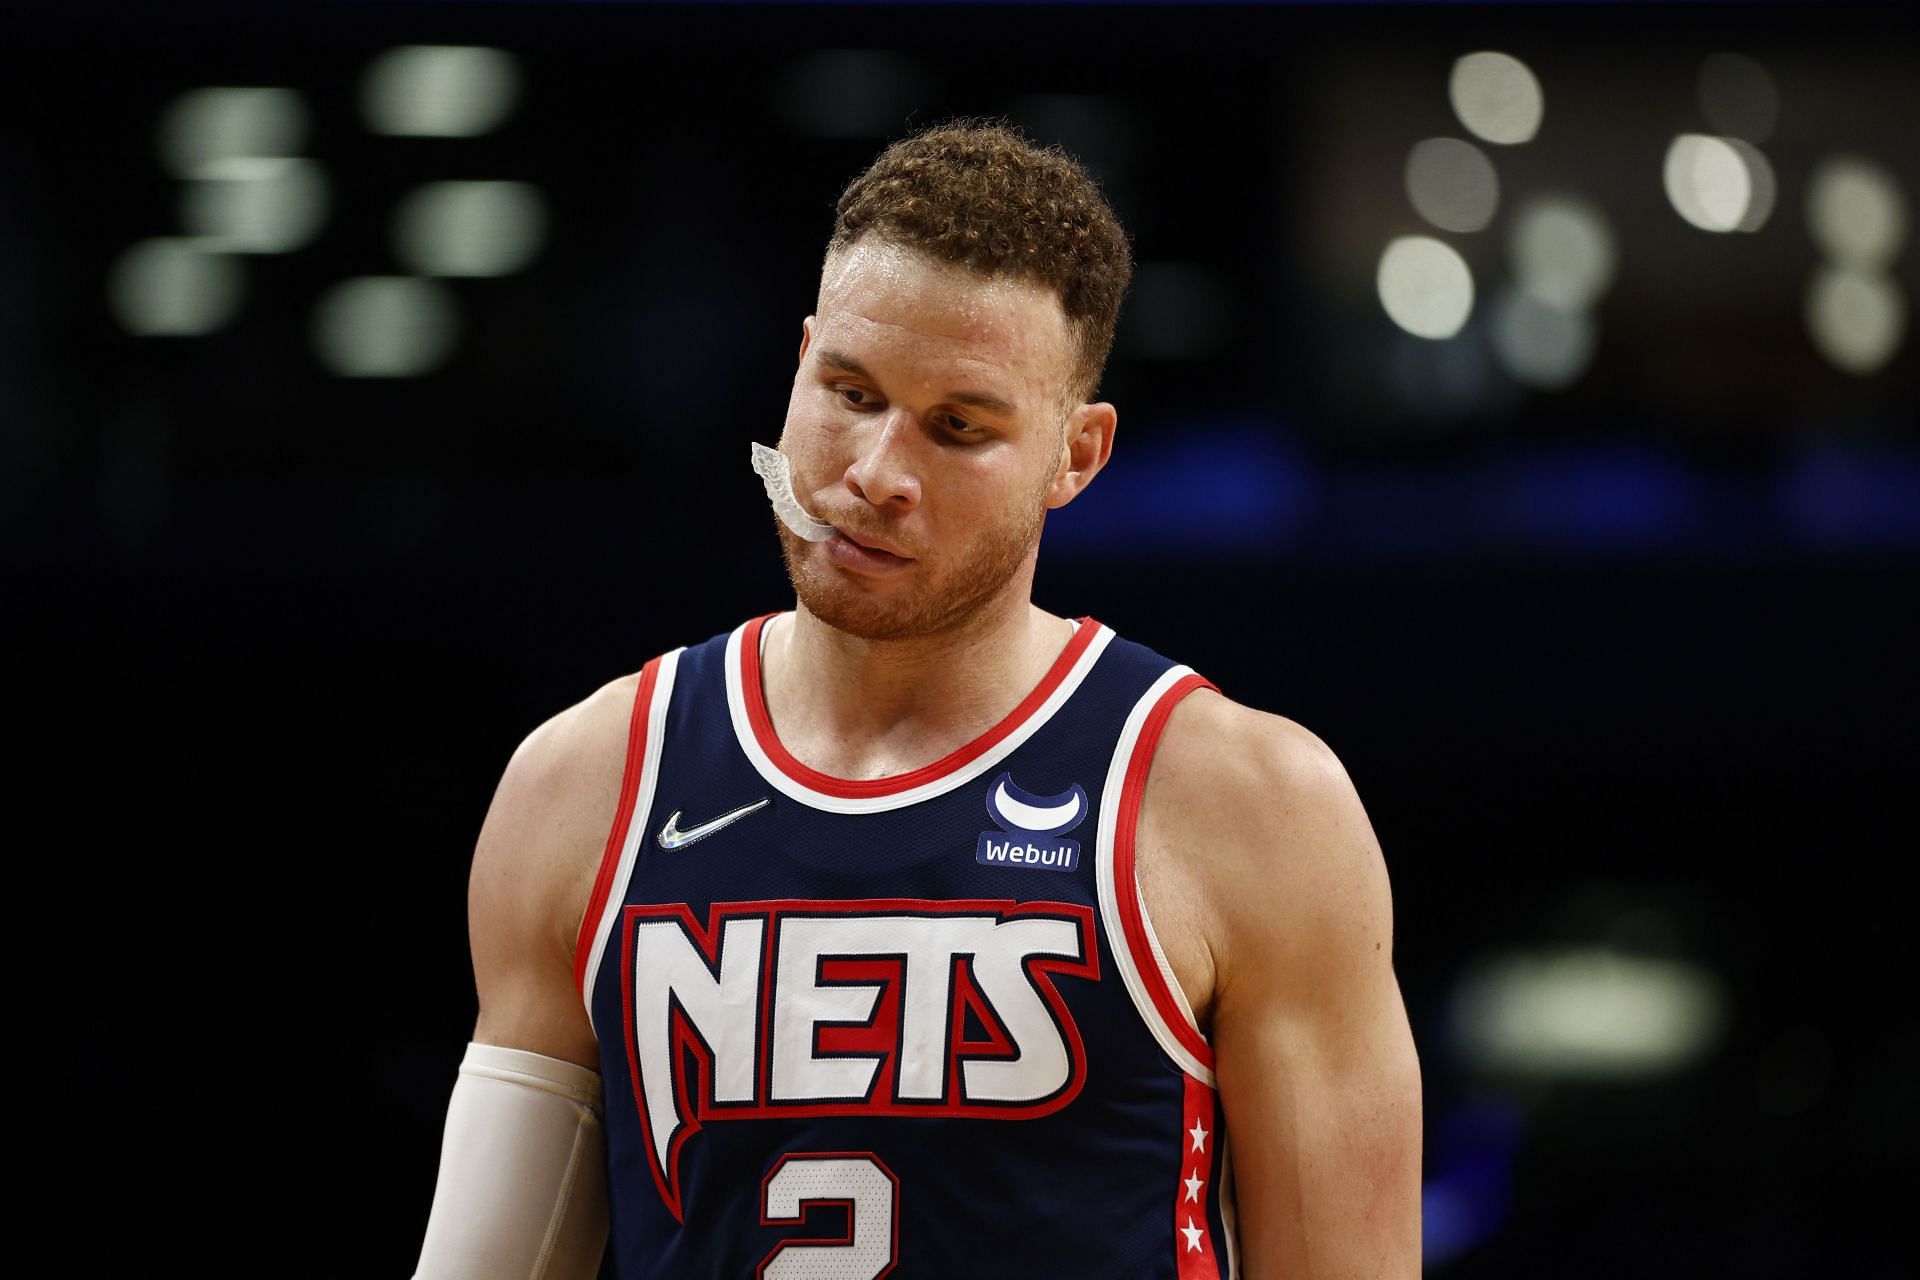 Blake Griffin reacts during the Orlando Magic v Brooklyn Nets game